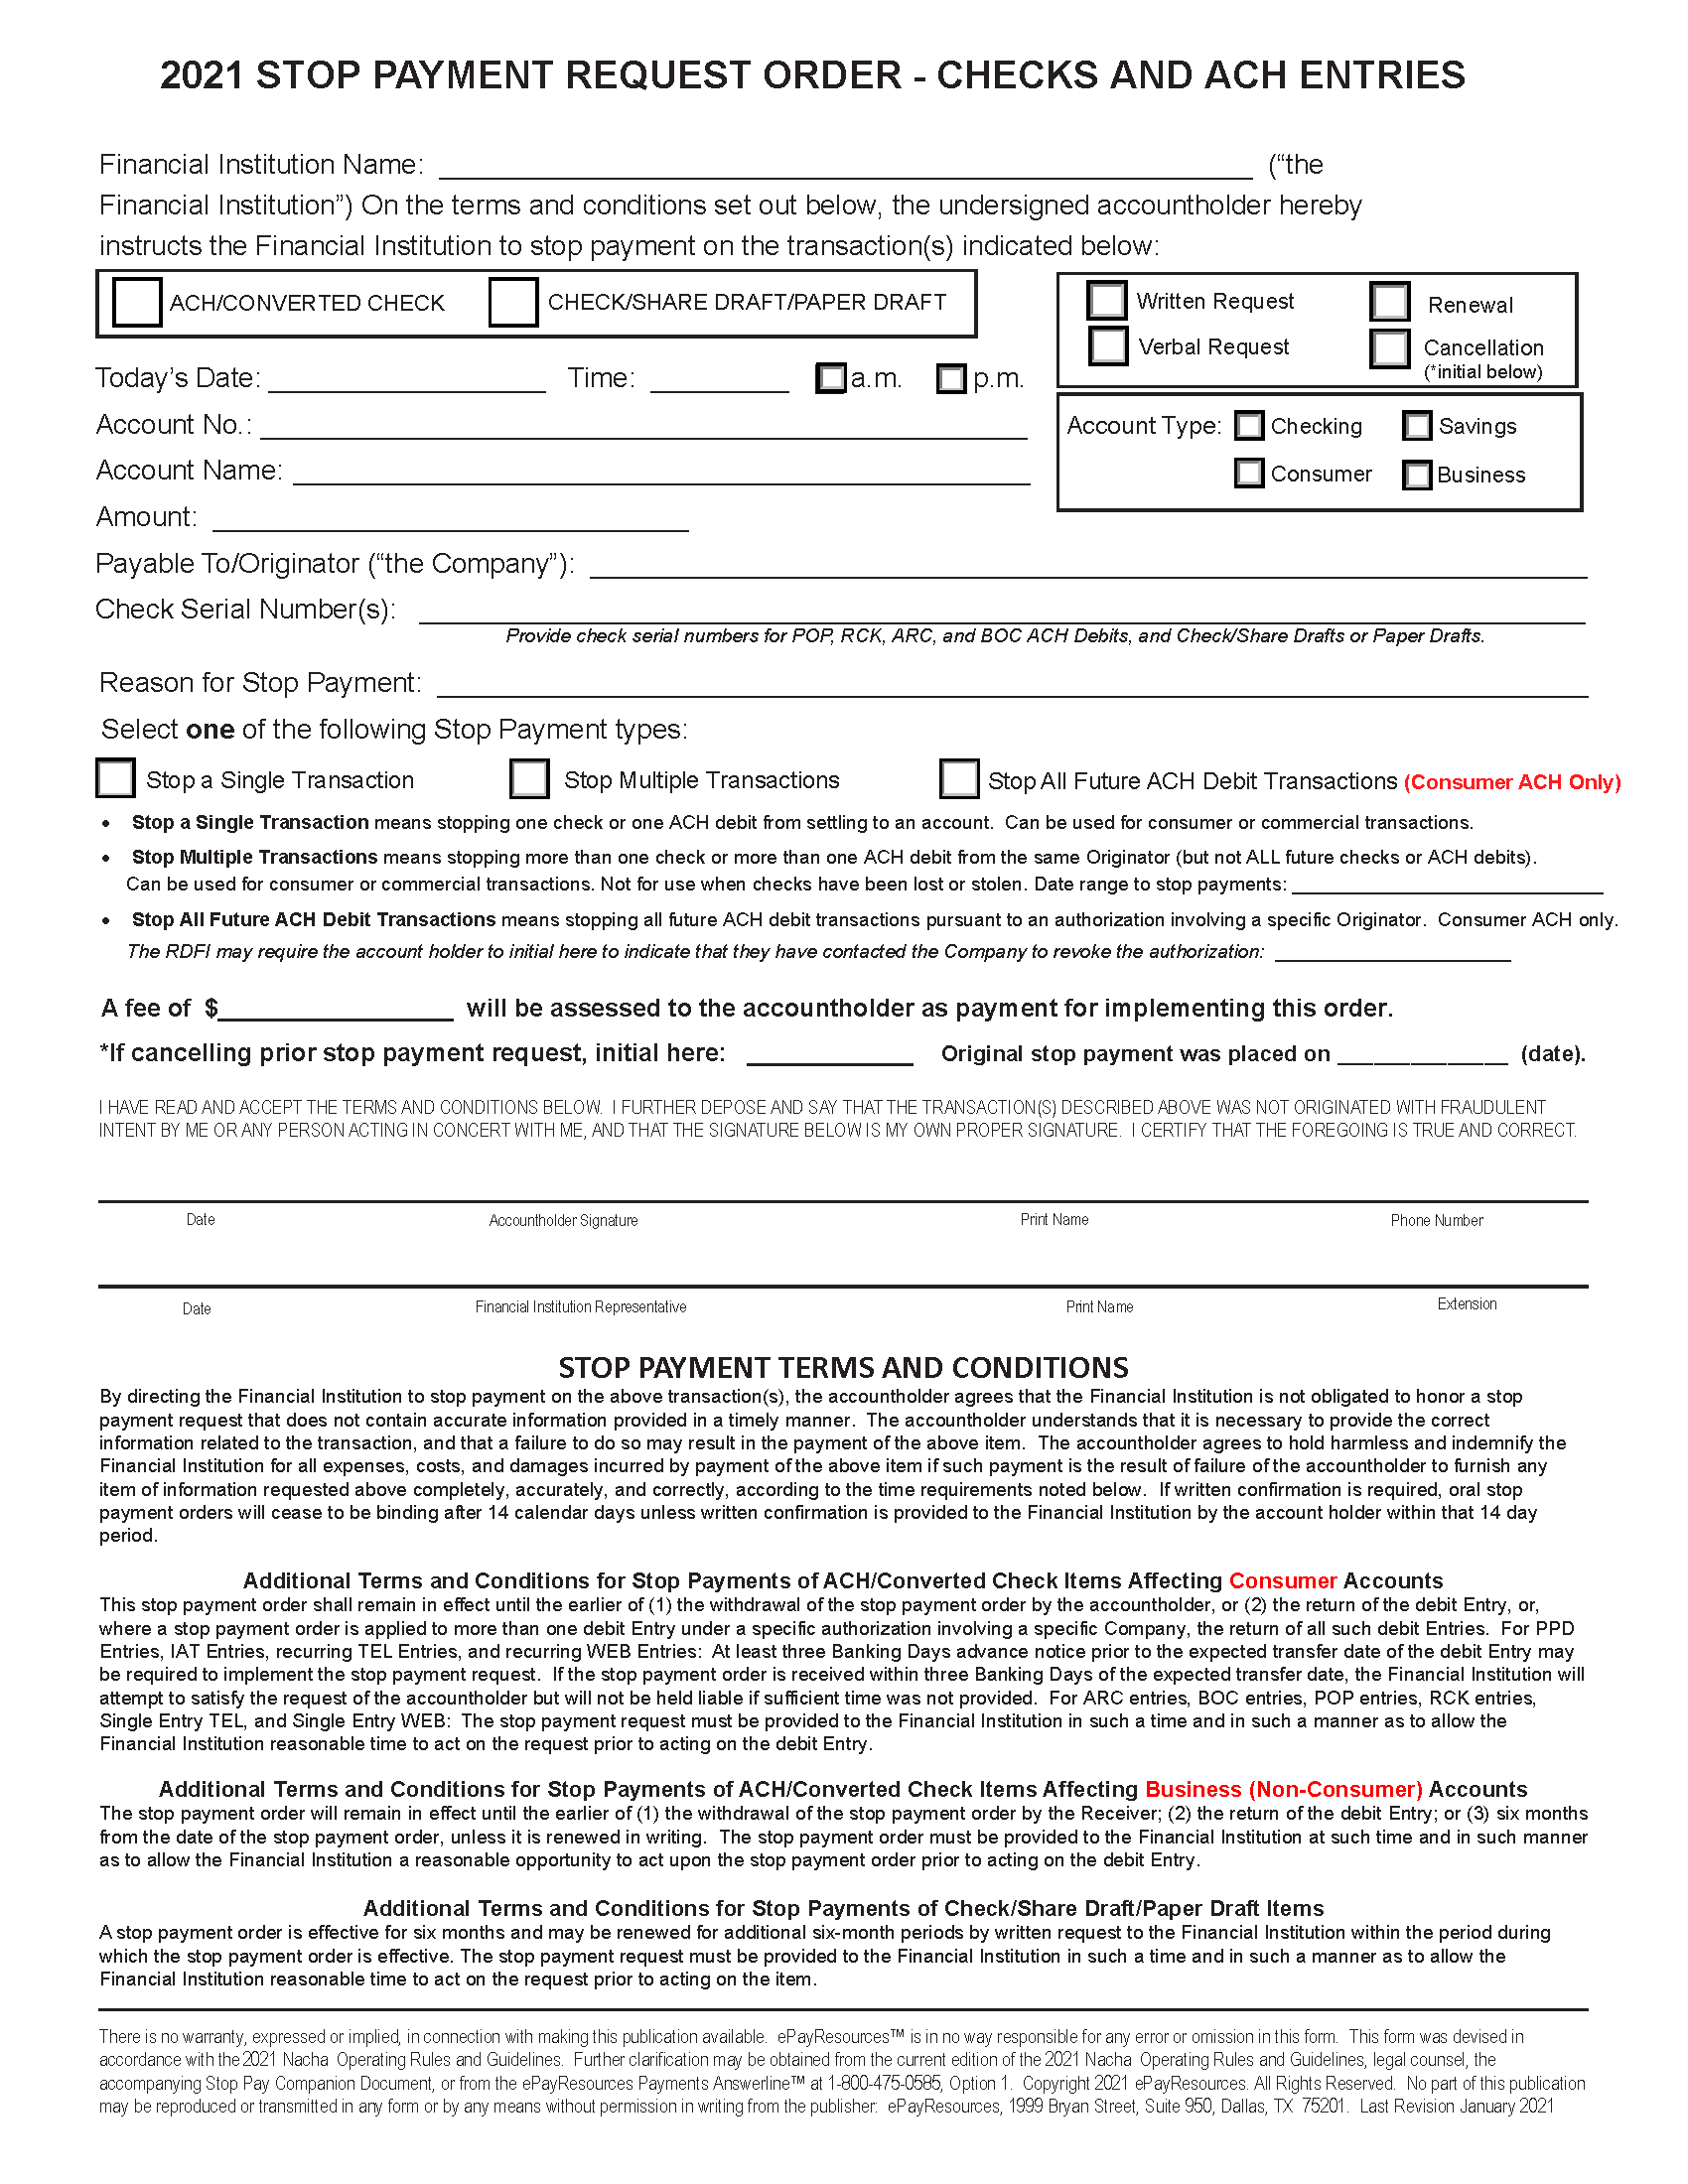 Electronic Stop Payment Request Form